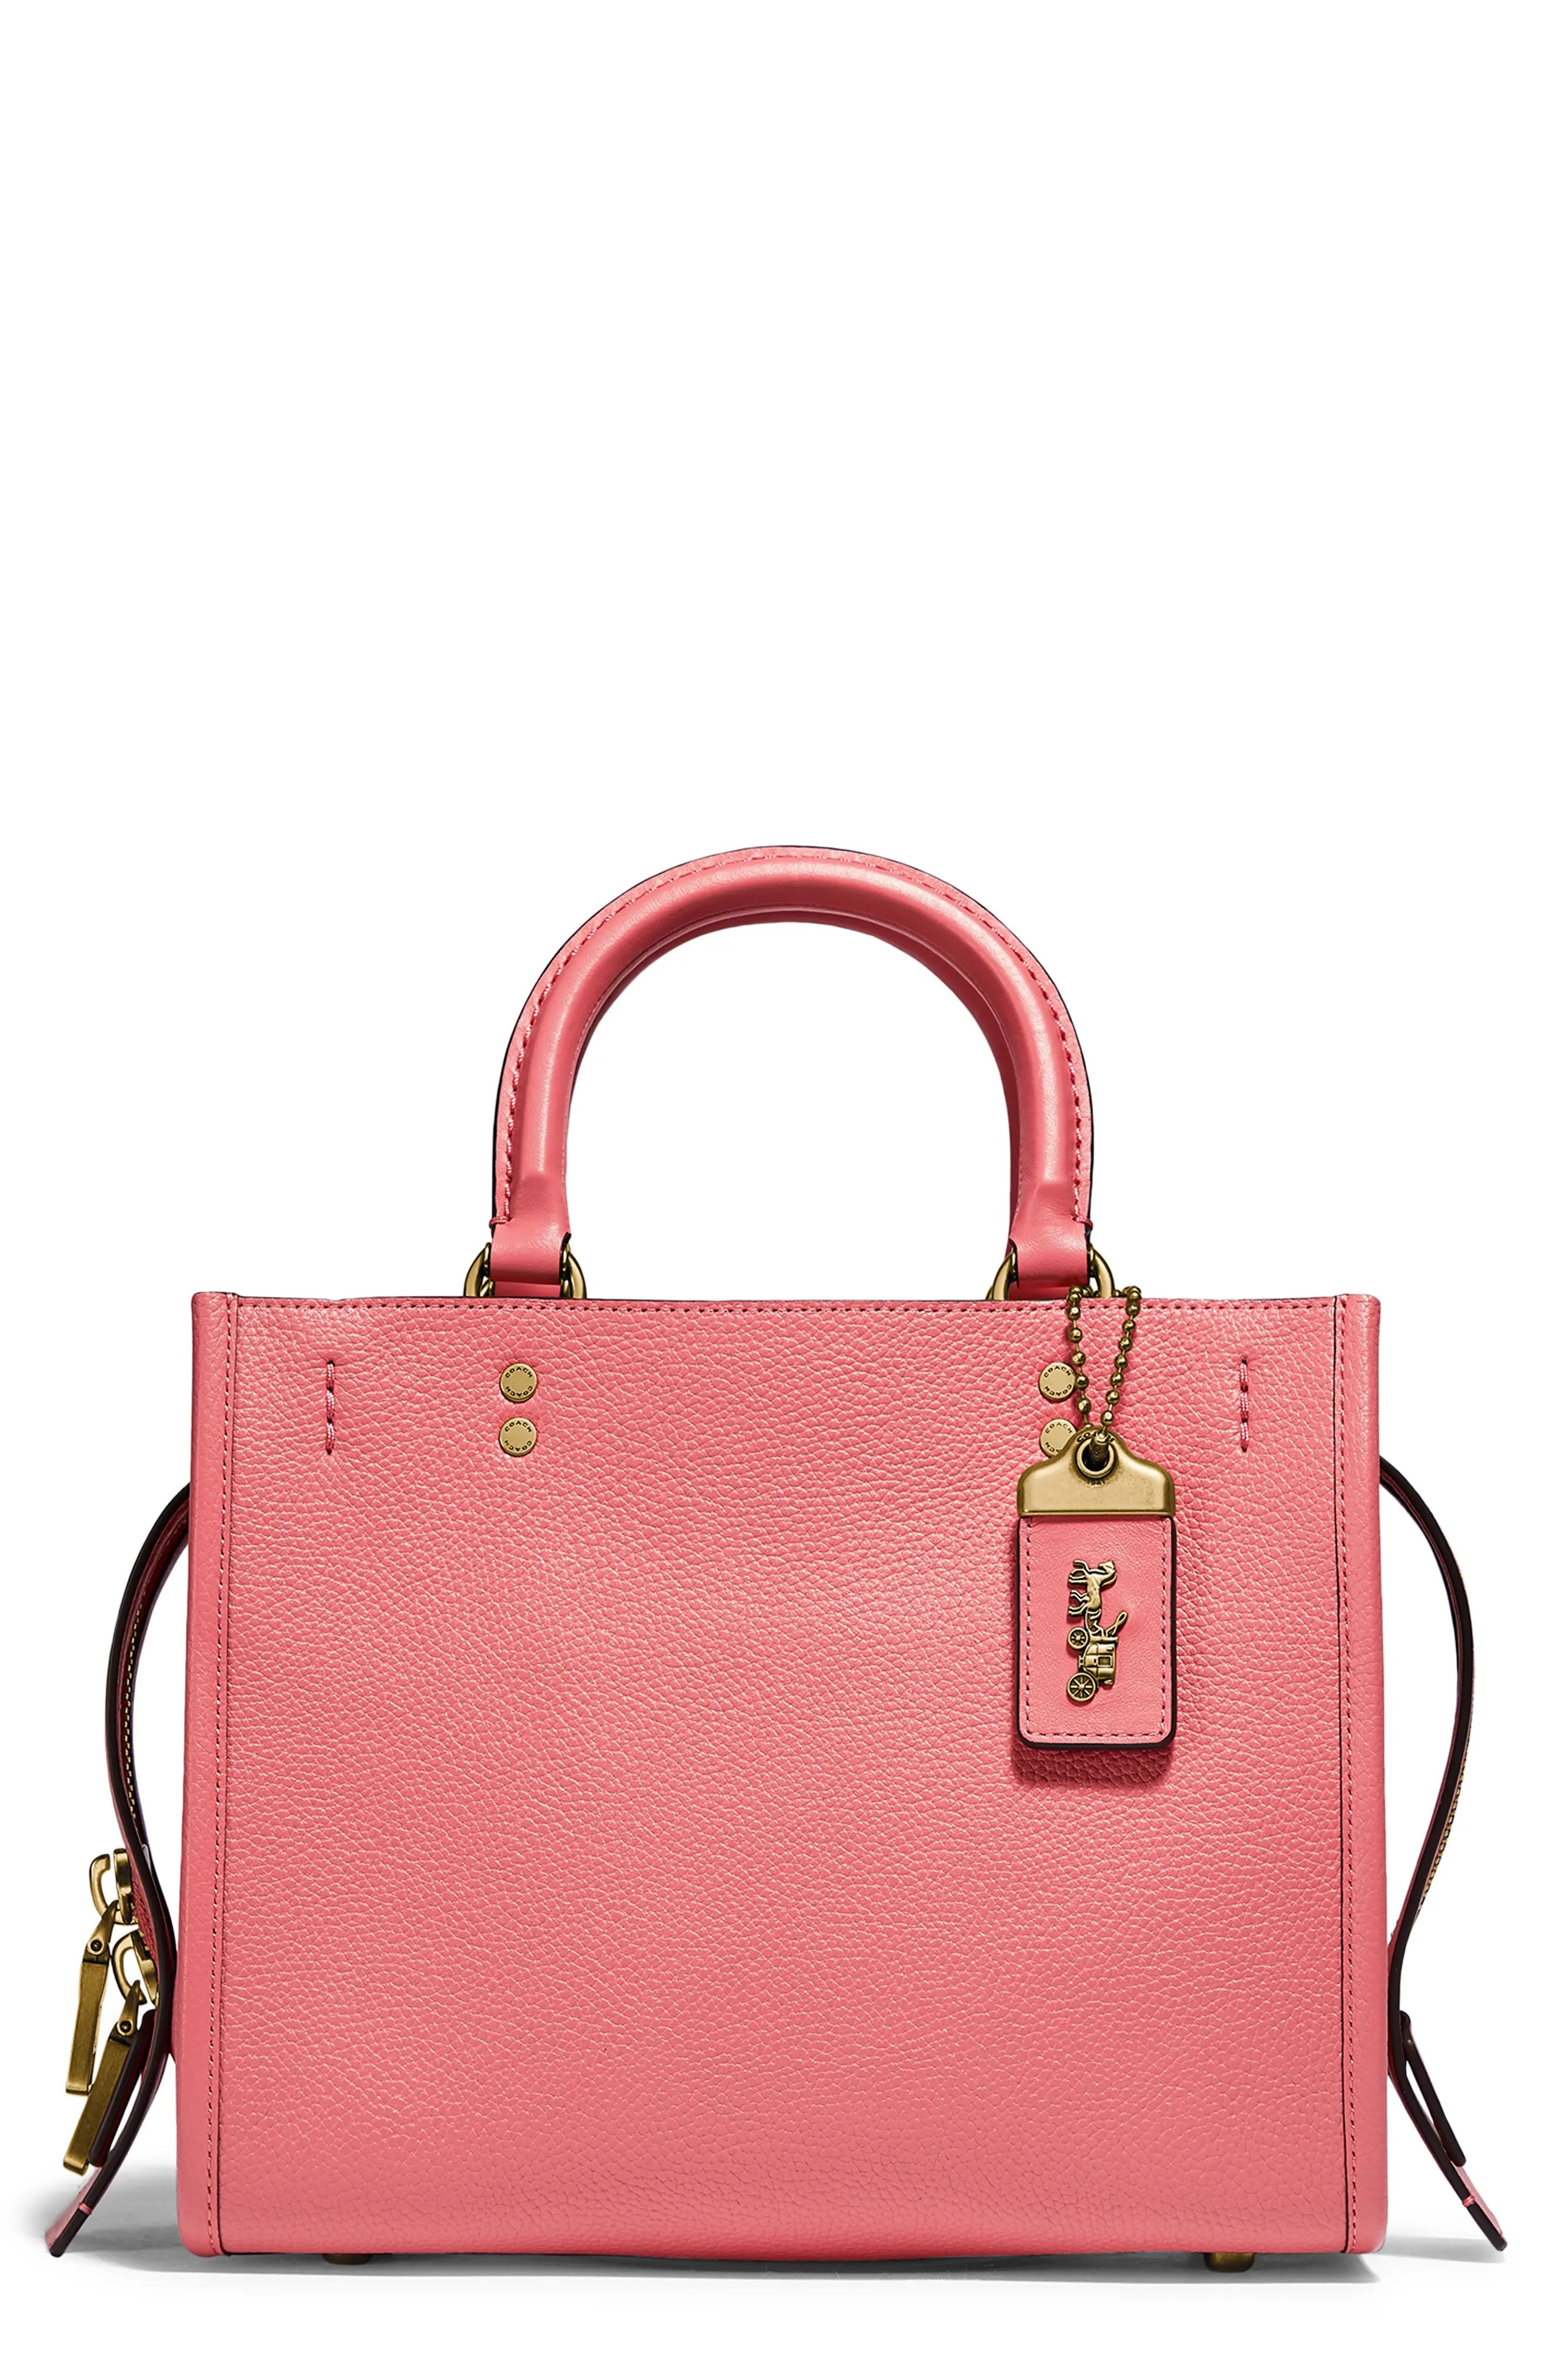 Coach Rogue Pebble Leather Crossbody Bag - Pink | Nordstrom